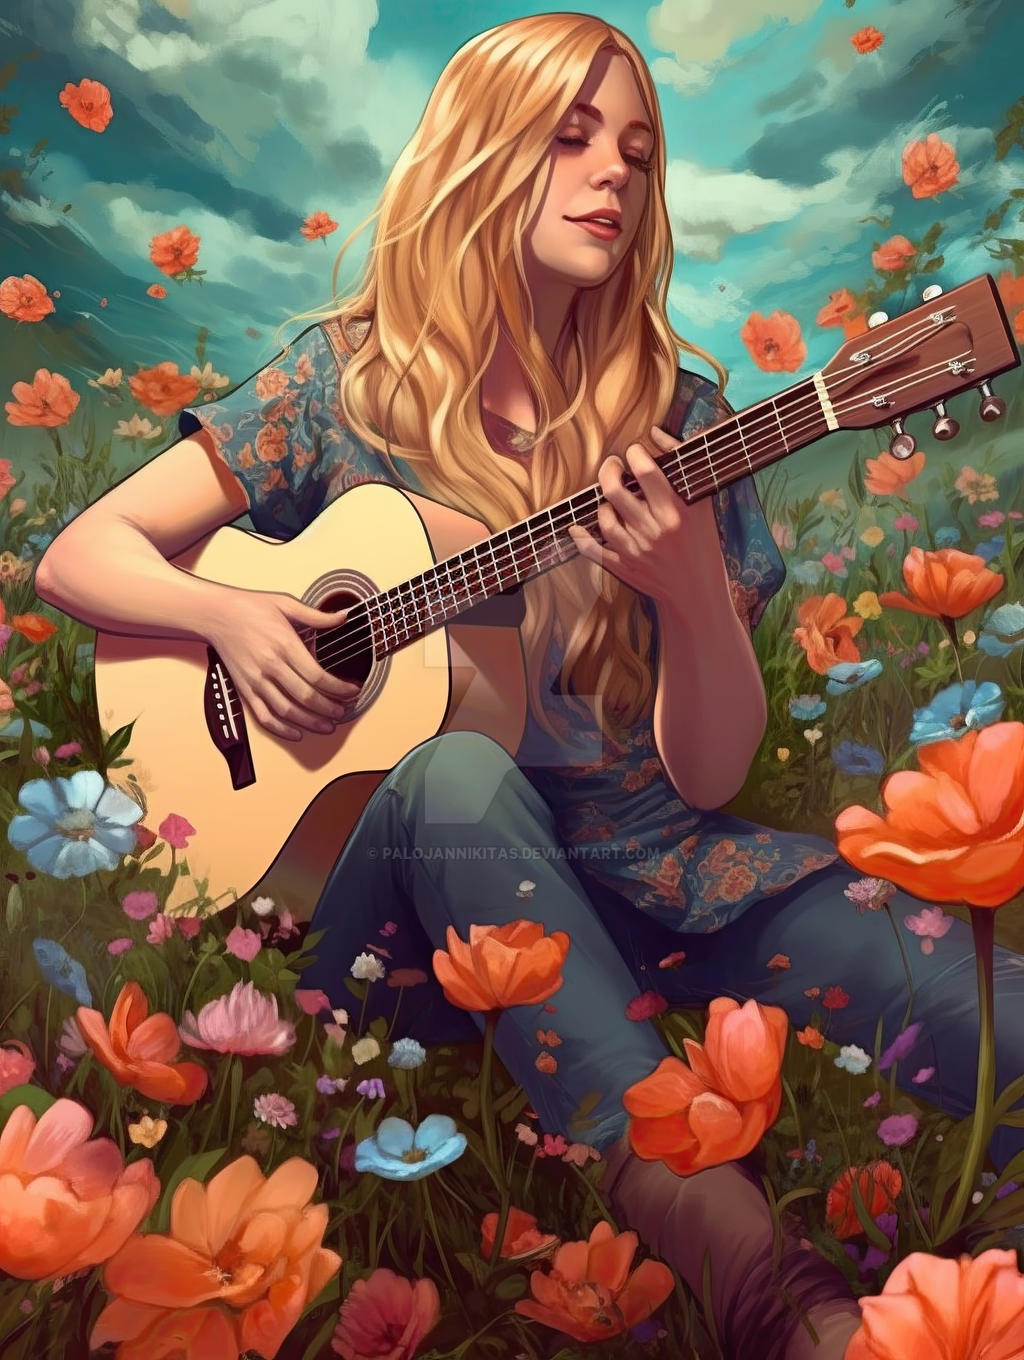 Female Playing Guitar Pose by theposearchives on DeviantArt